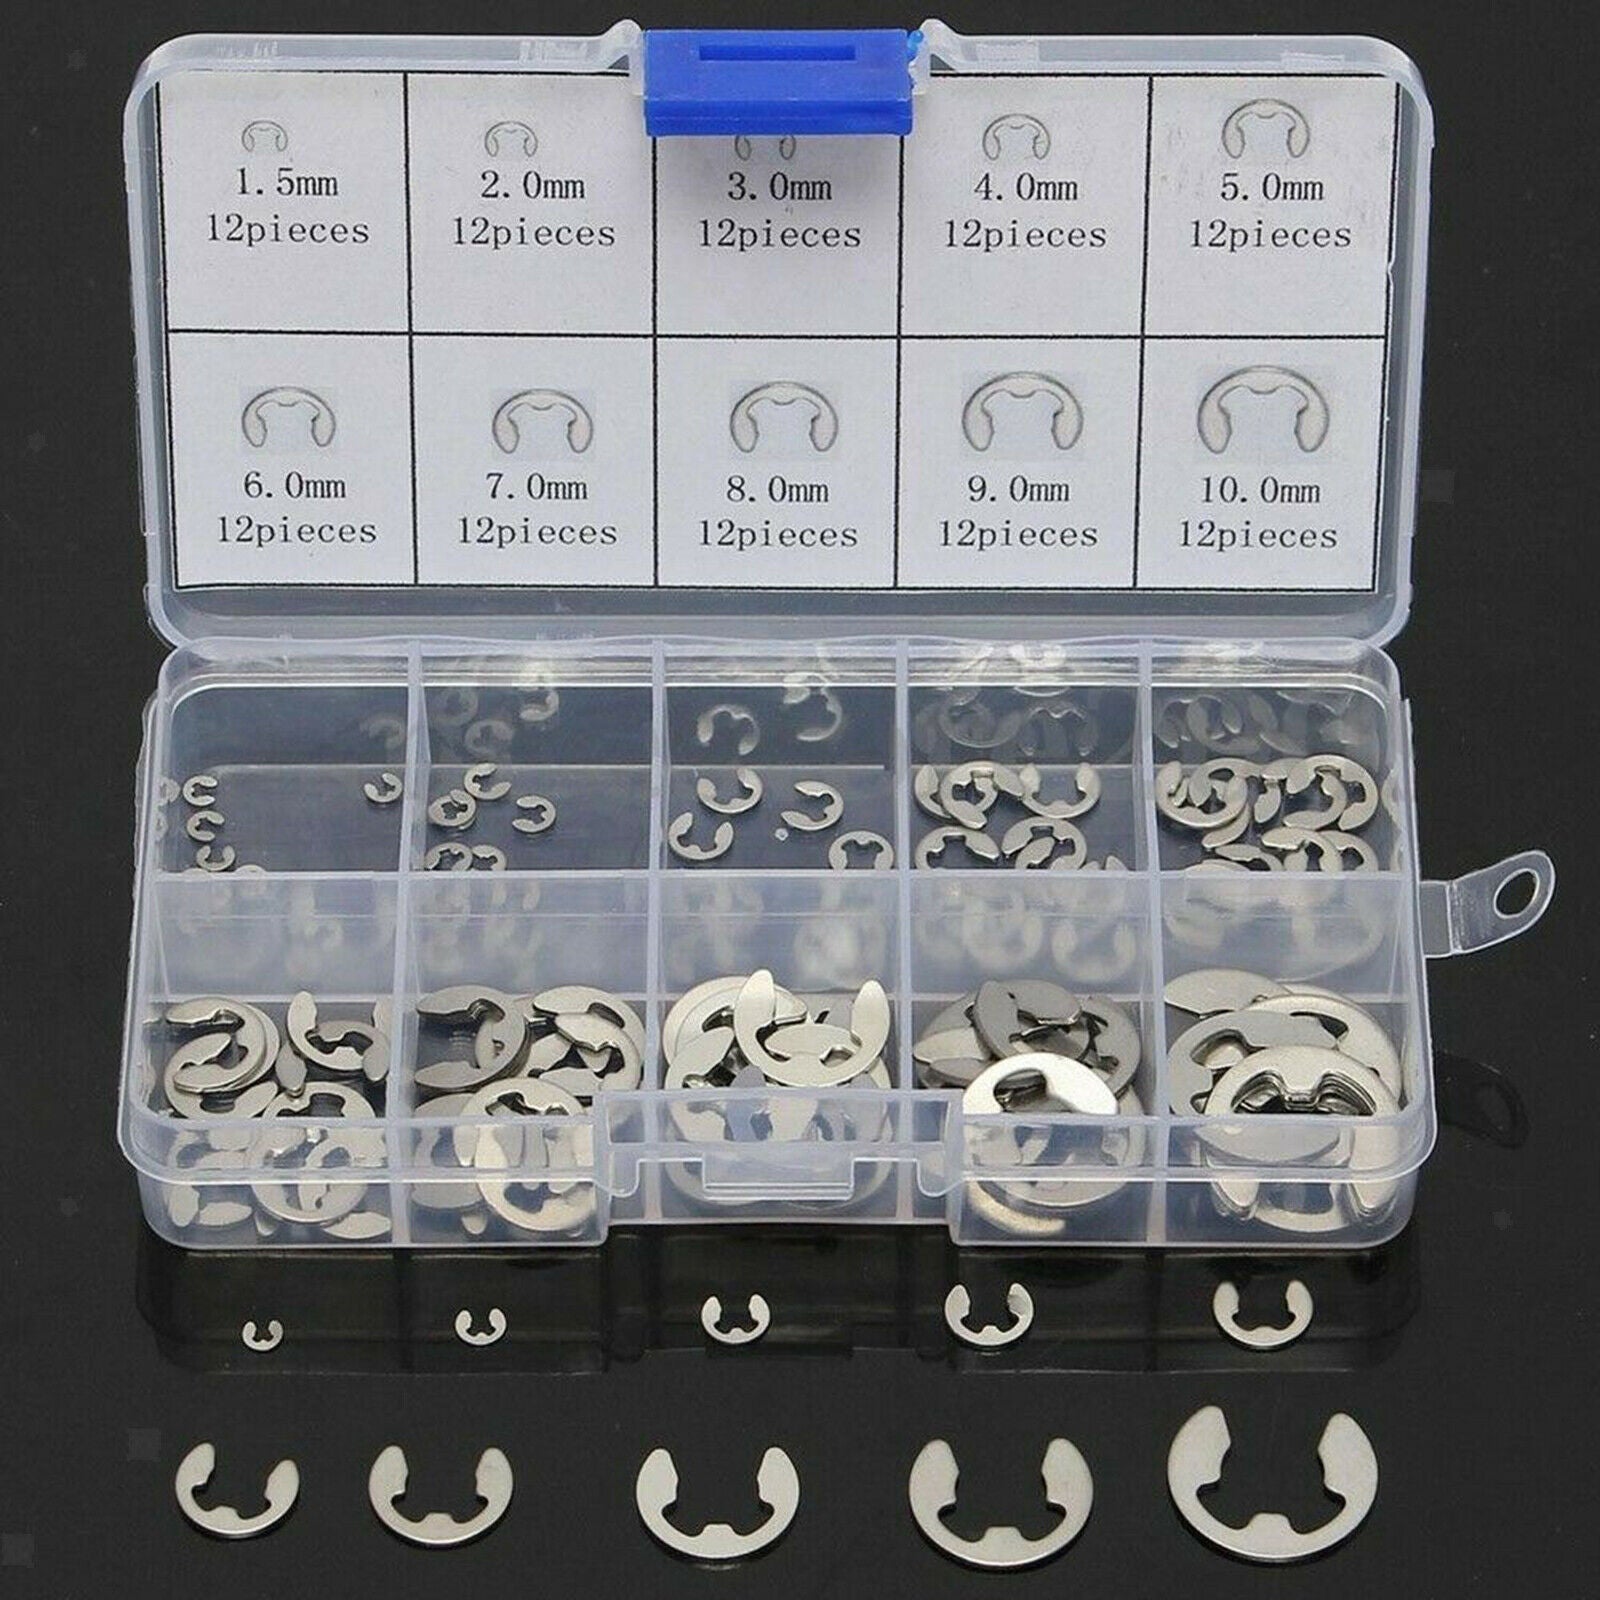 1.5mm 2mm to 10mm External E Clips - Circlip - Stainless Steel Assortment Kit